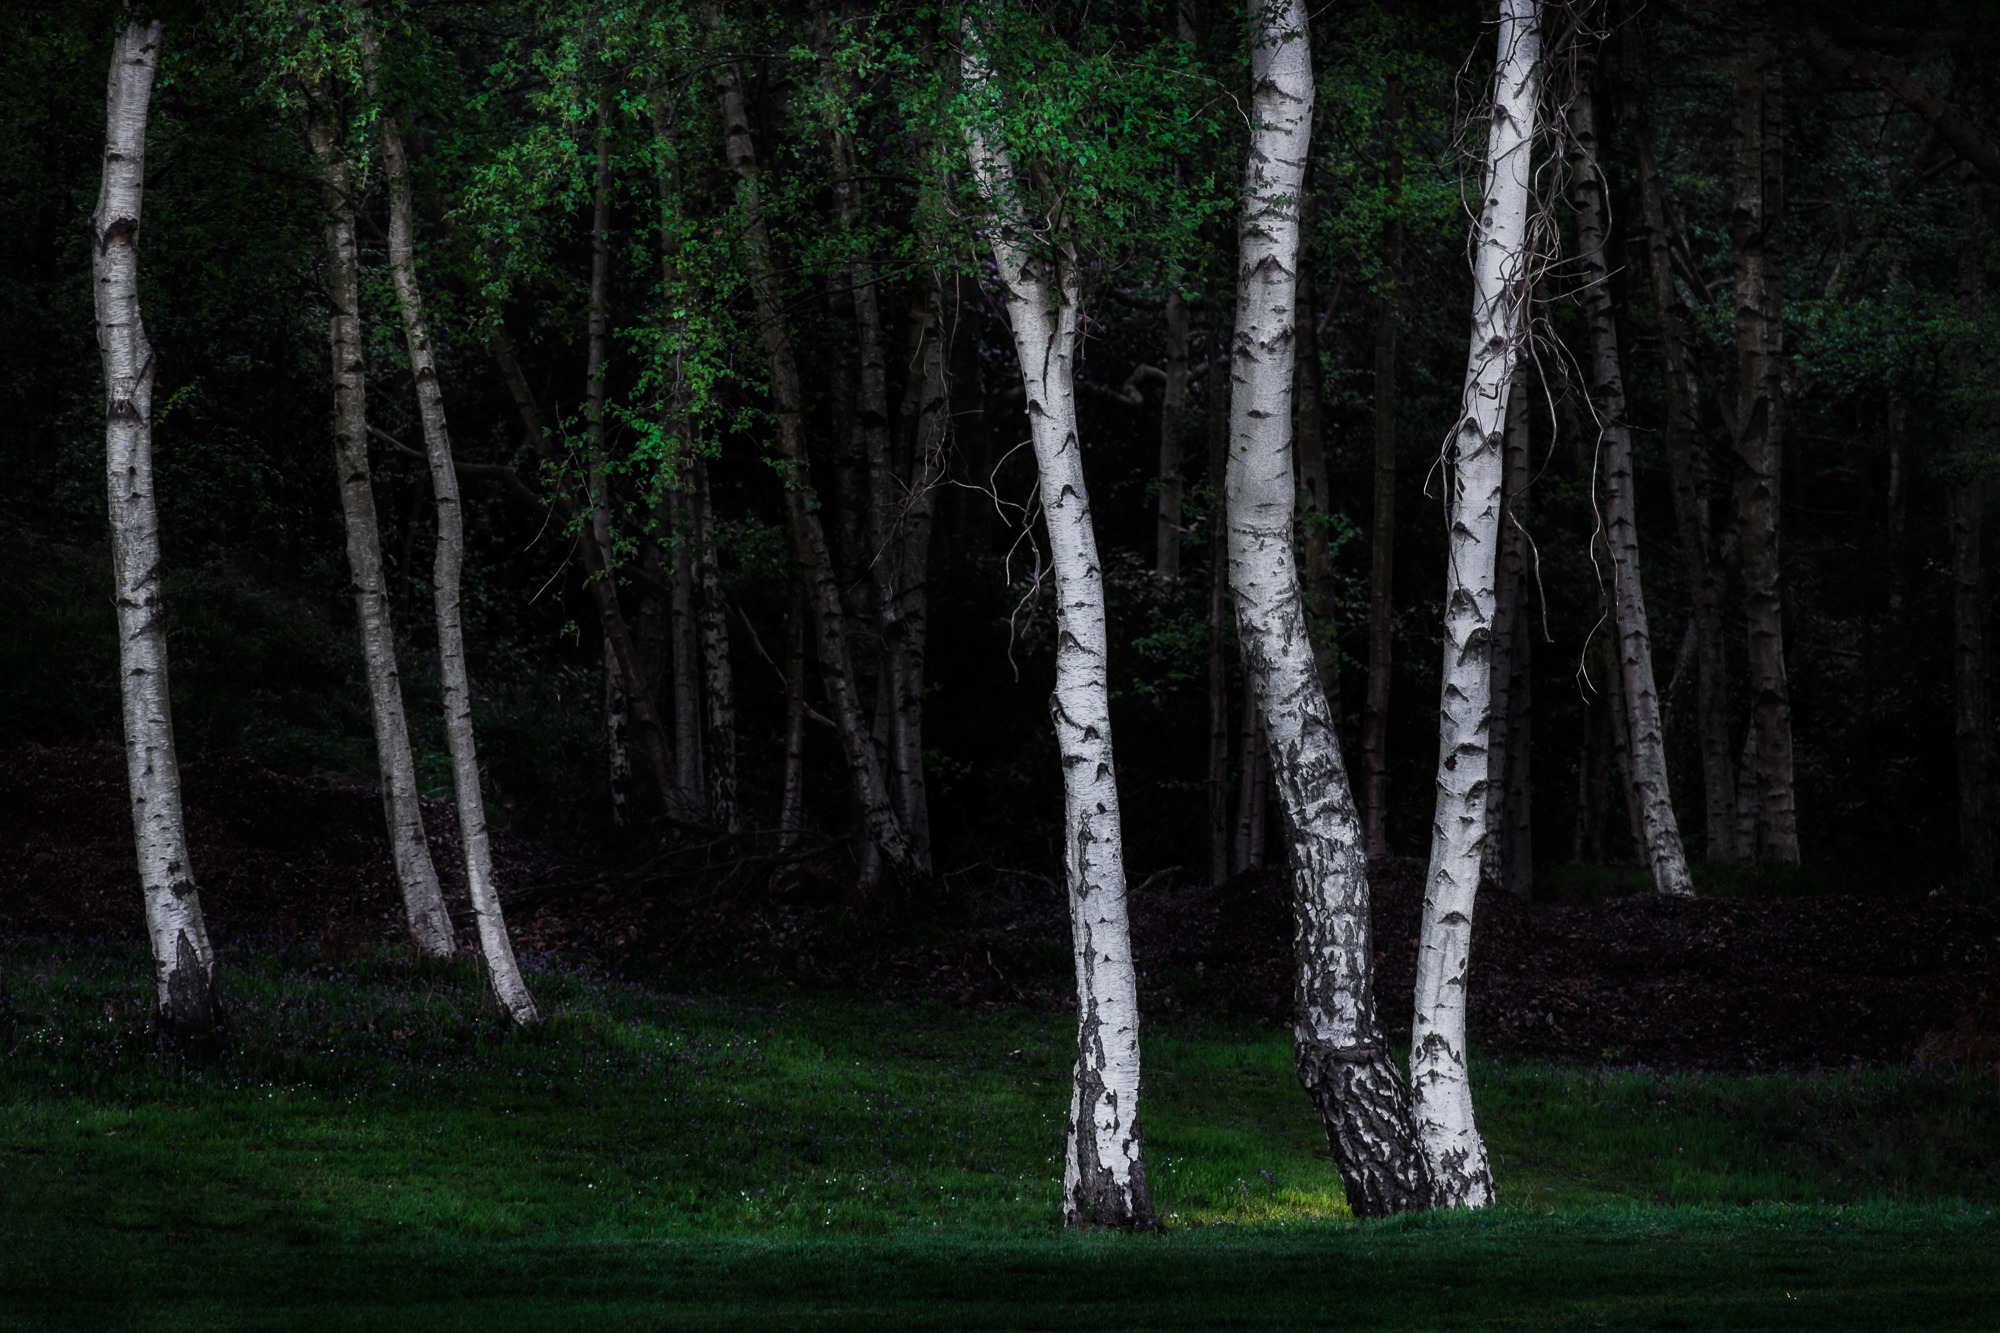 In the Dark of the Birch Wood